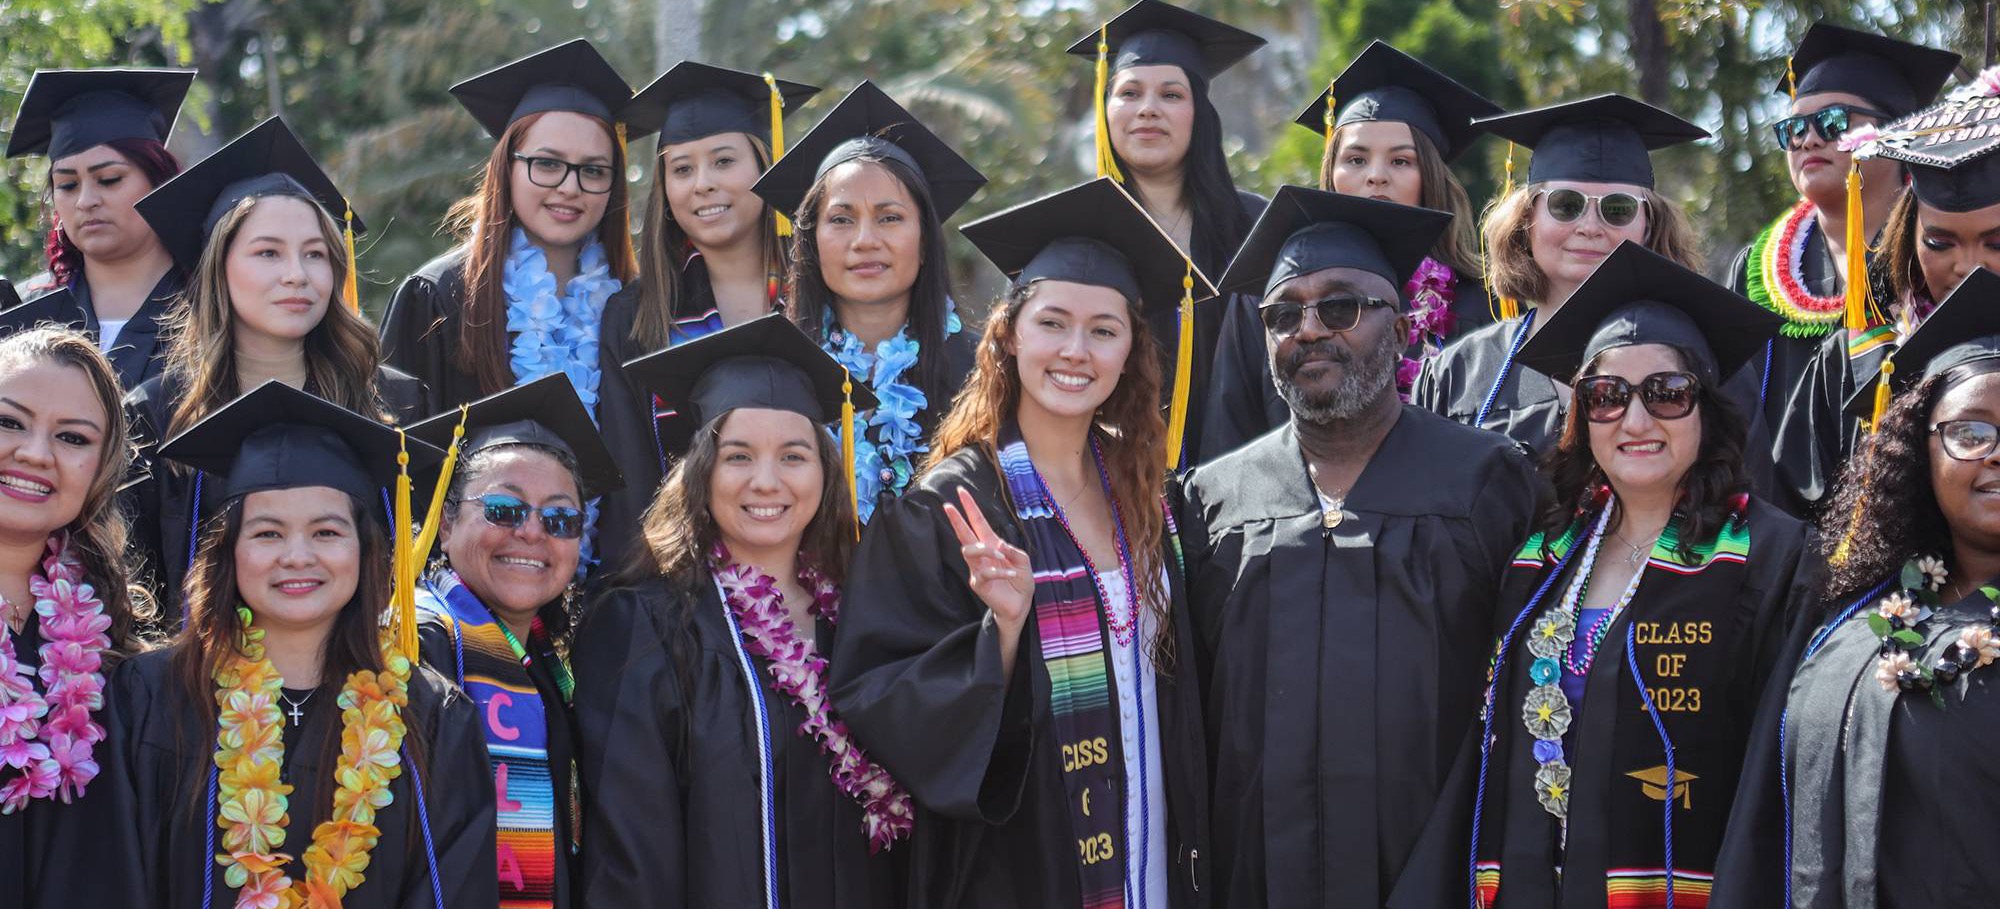 A group of students in black graduation caps and gowns at San Diego College of Continuing Education's 2023 Commencement